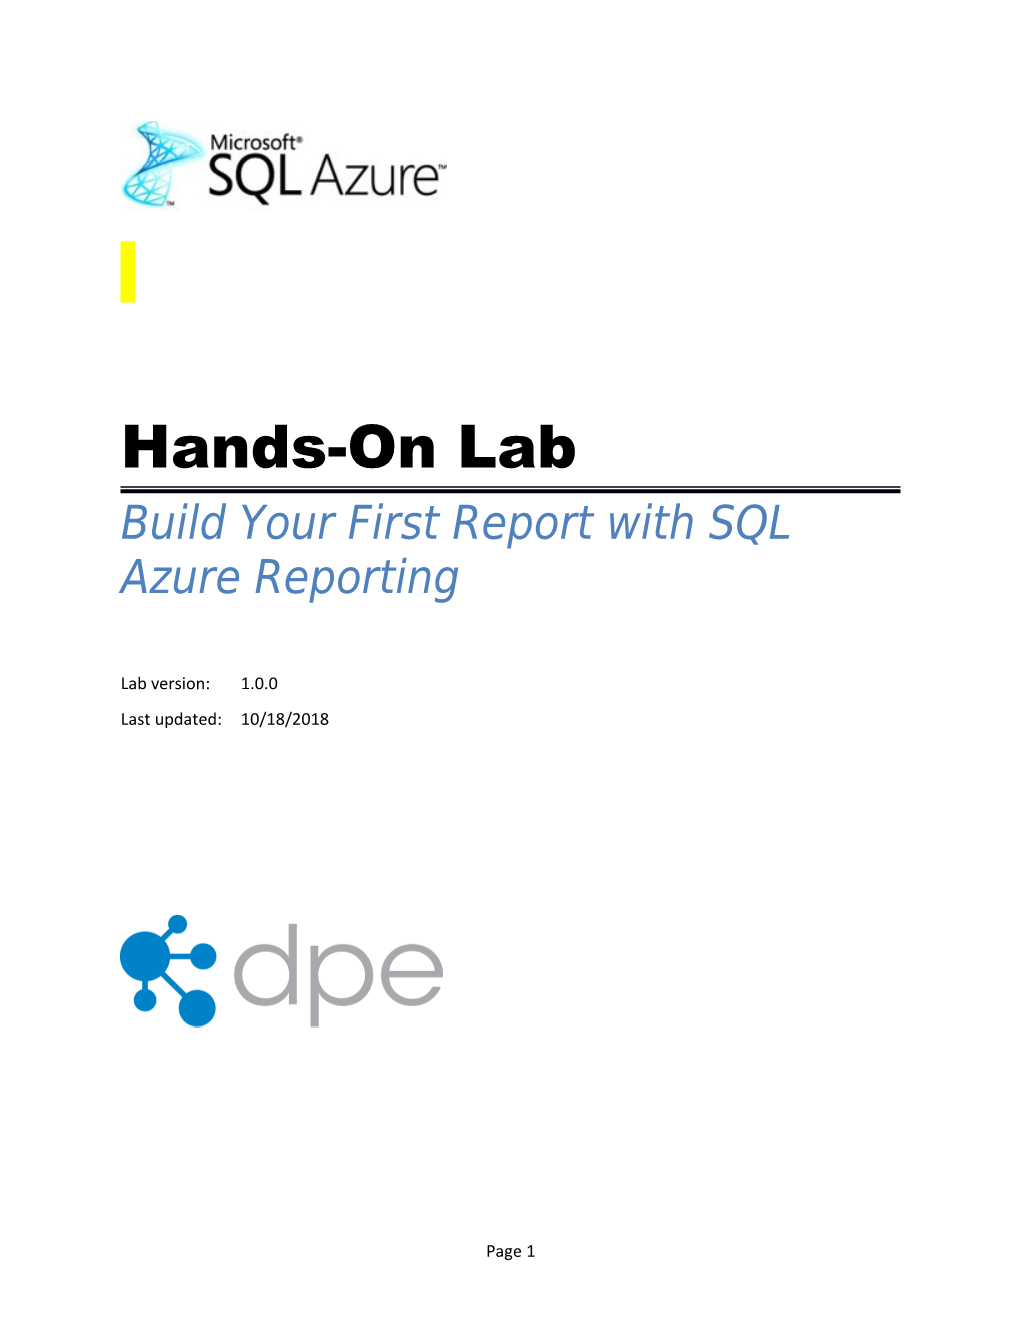 Build Your First Report with SQL Azure Reporting